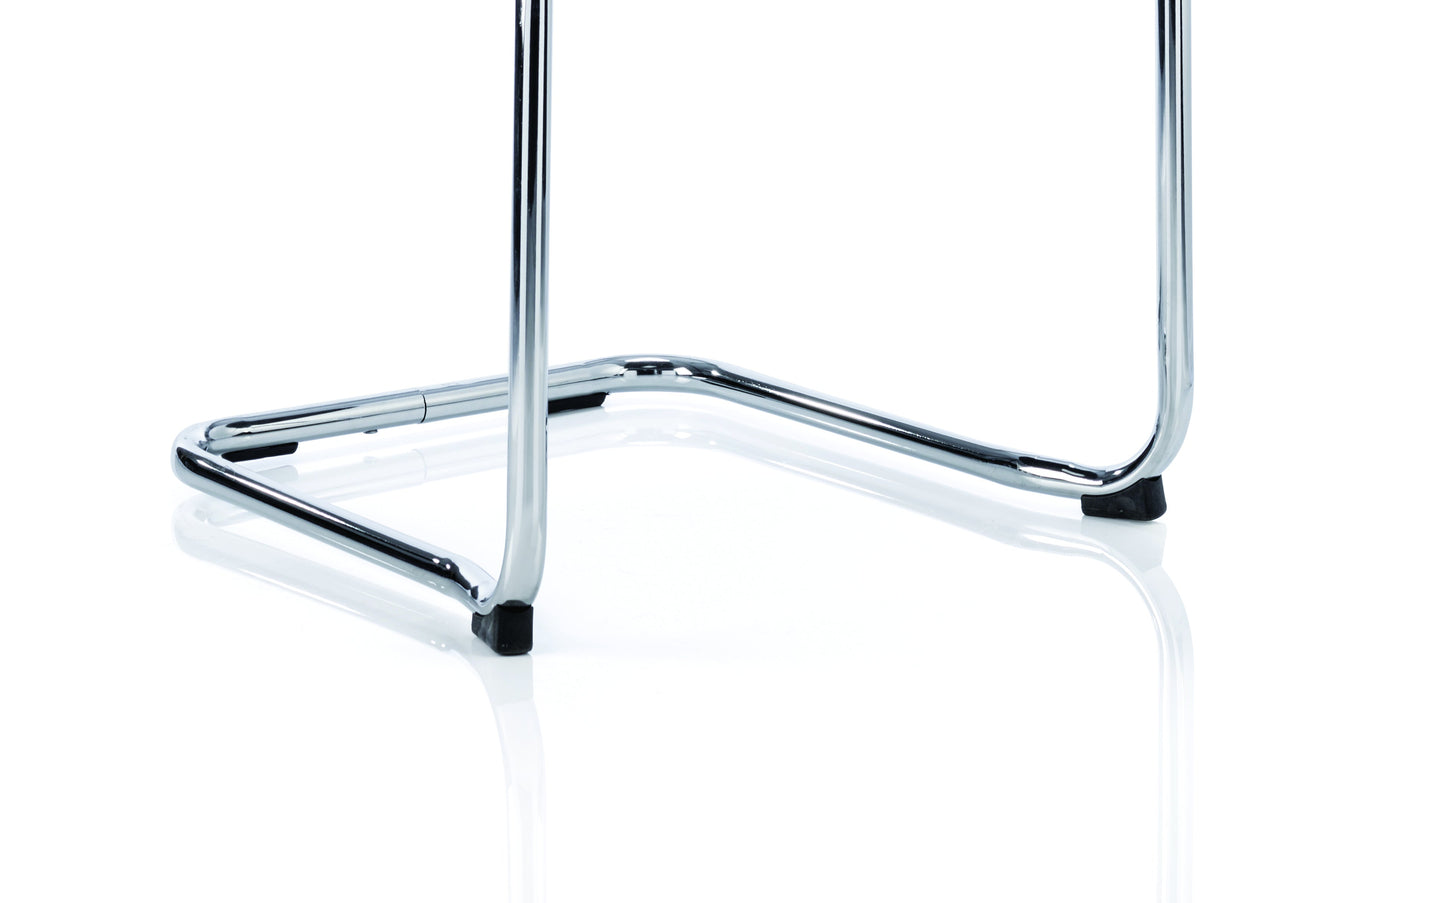 Echo Cantilever Chair